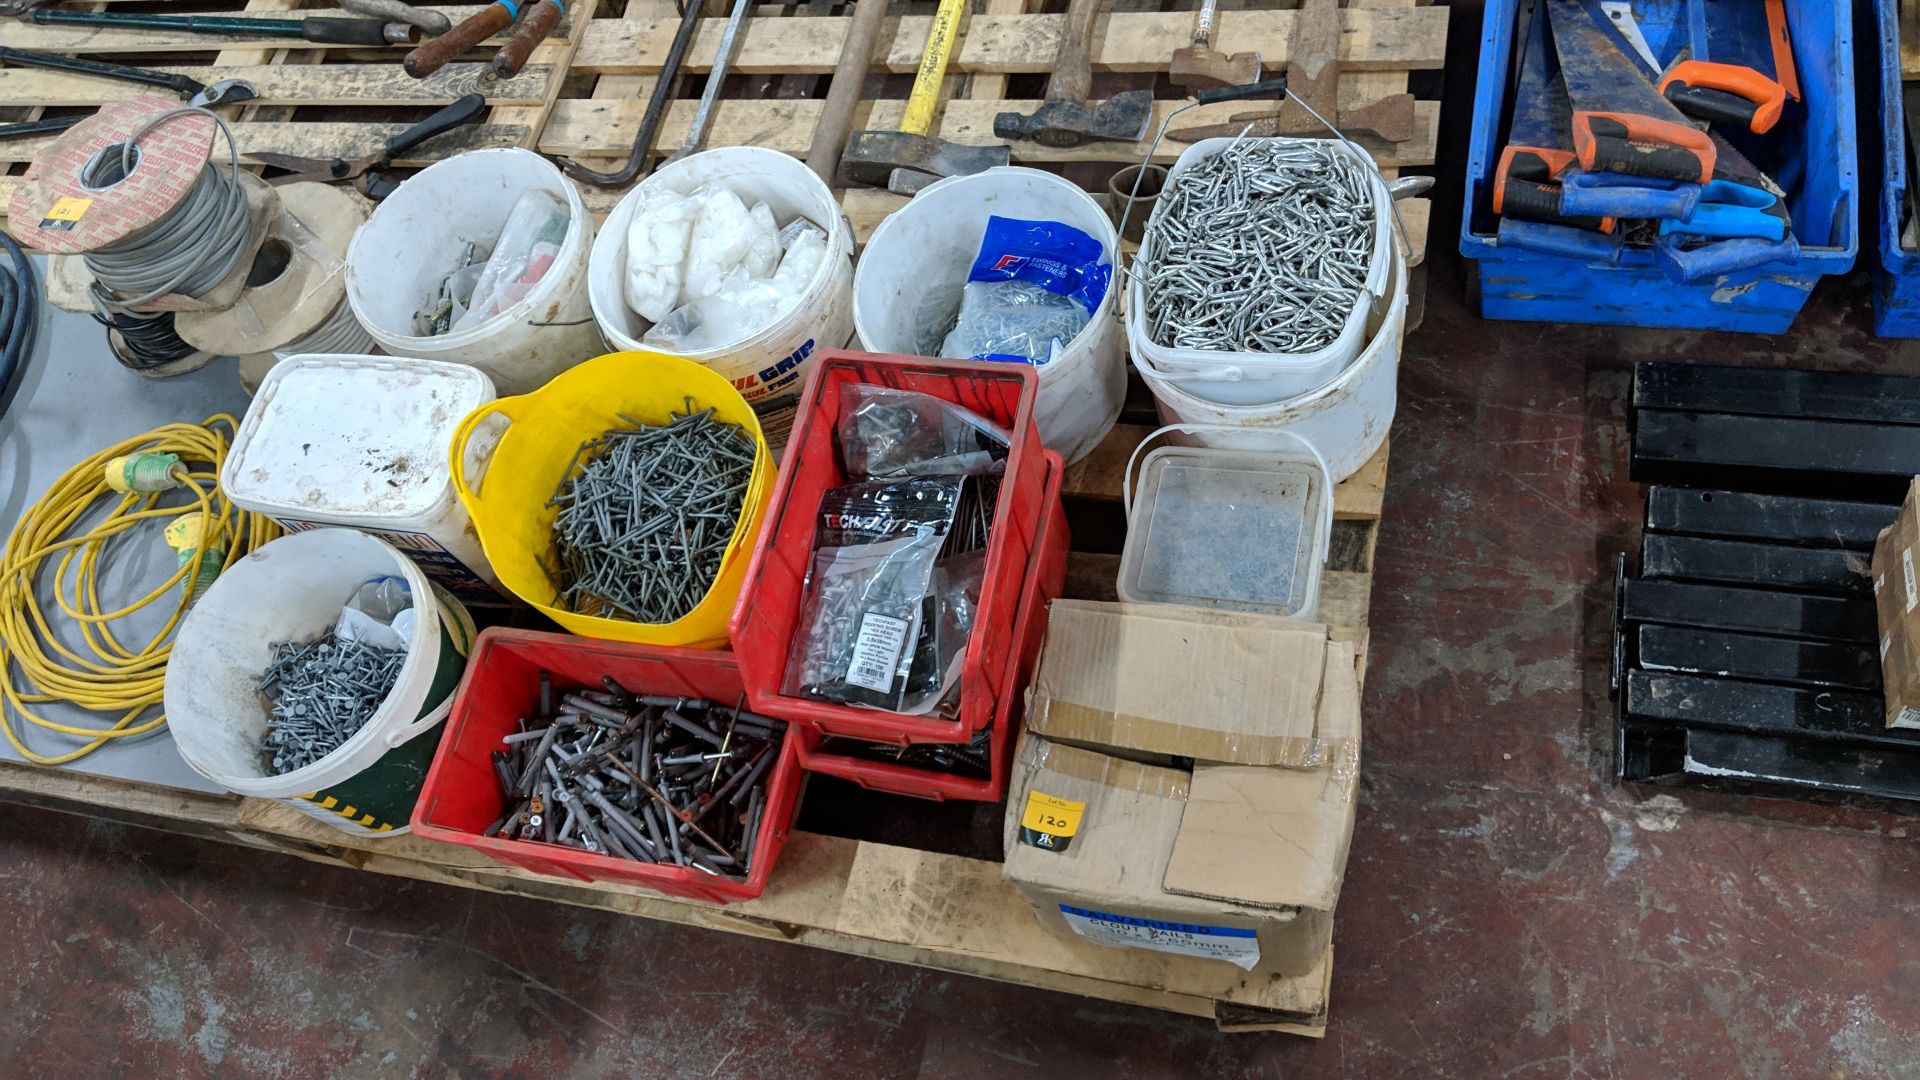 Contents of a pallet of assorted fixings, including screws, clips, pins & more - pallet excluded